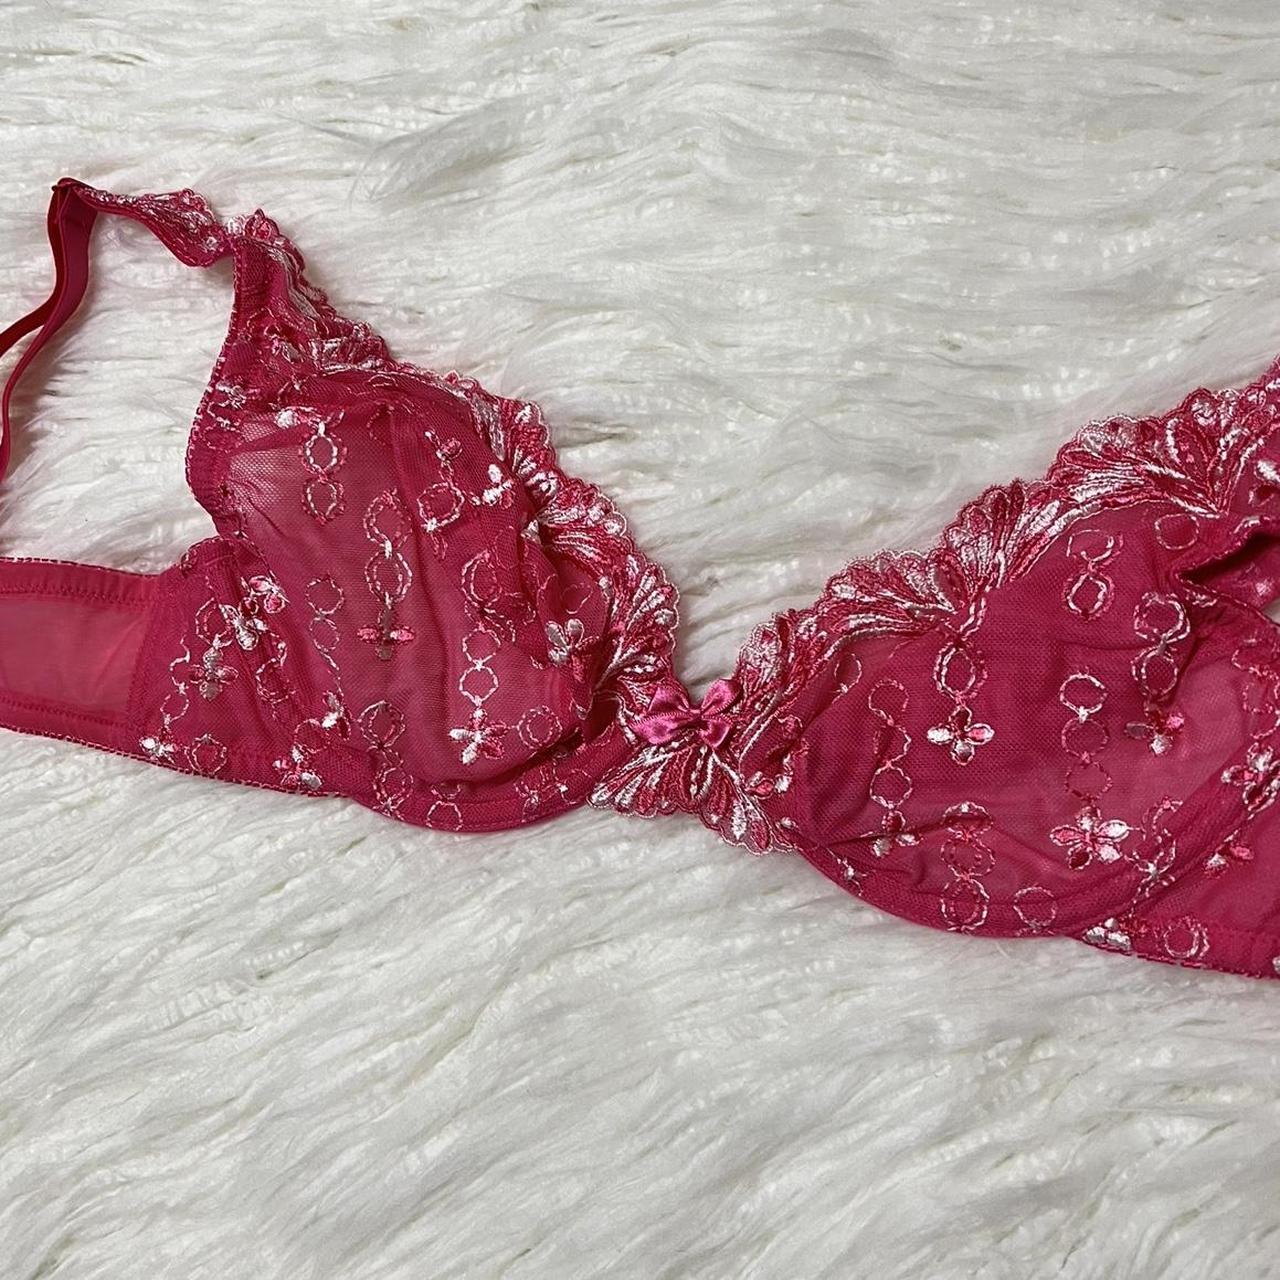 Frederick's of Hollywood Women's Pink Bra (2)